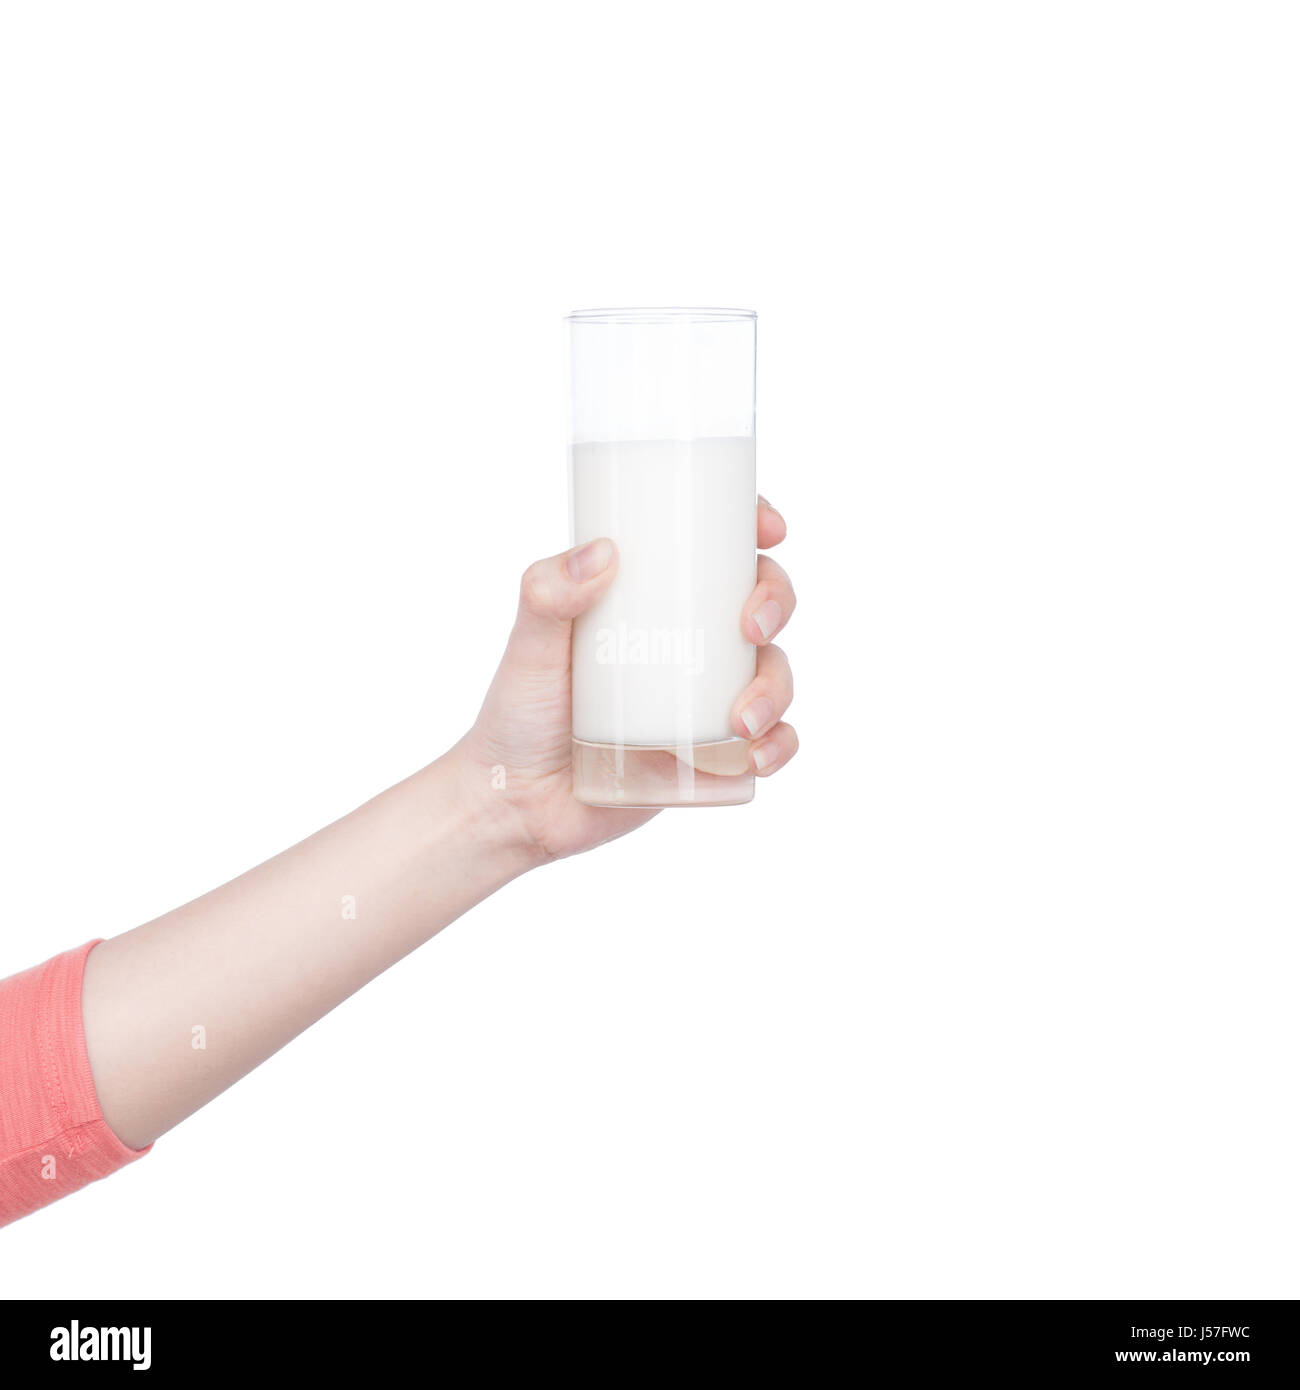 https://c8.alamy.com/comp/J57FWC/hand-holding-glass-of-milk-isolated-on-white-background-J57FWC.jpg